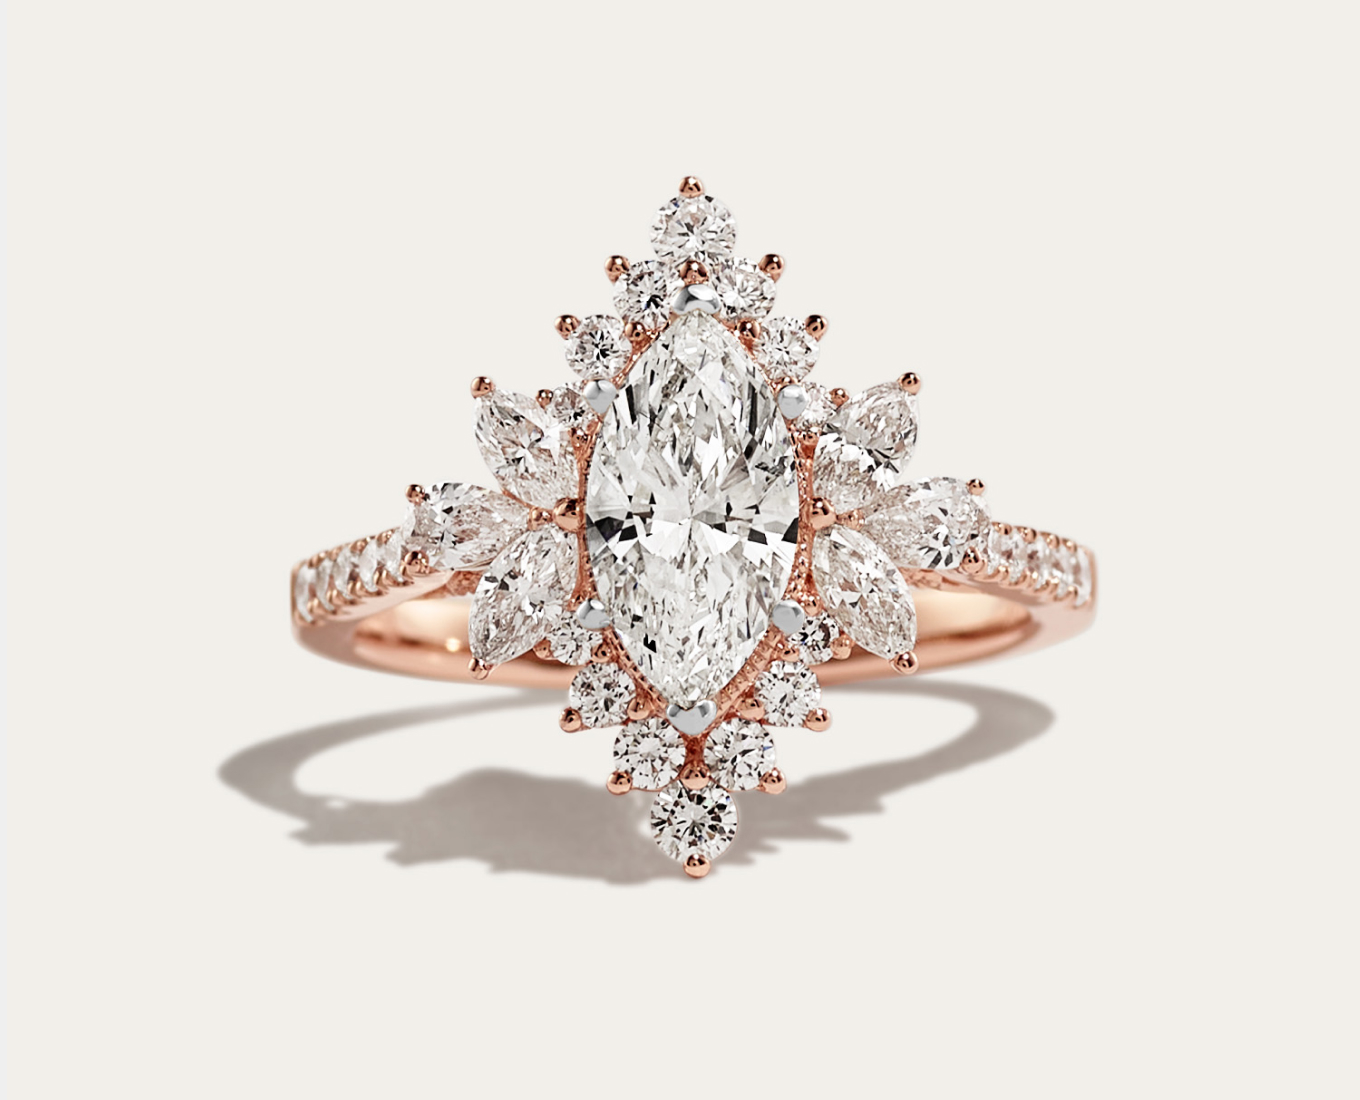 Cypress Halo Engagement Ring A showstopping halo of natural diamonds surrounds the center stone of your choice in this breathtaking engagement ring design. A mix of hand-matched marquise, pear, and round diamonds accents create unique shape, while jaw-dropping pavé dazzles along the quality 14-karat rose gold band. For more information on selecting your center stone, live chat online, call a customer service representative at 1-866-467-4263, or visit one of our store locations.